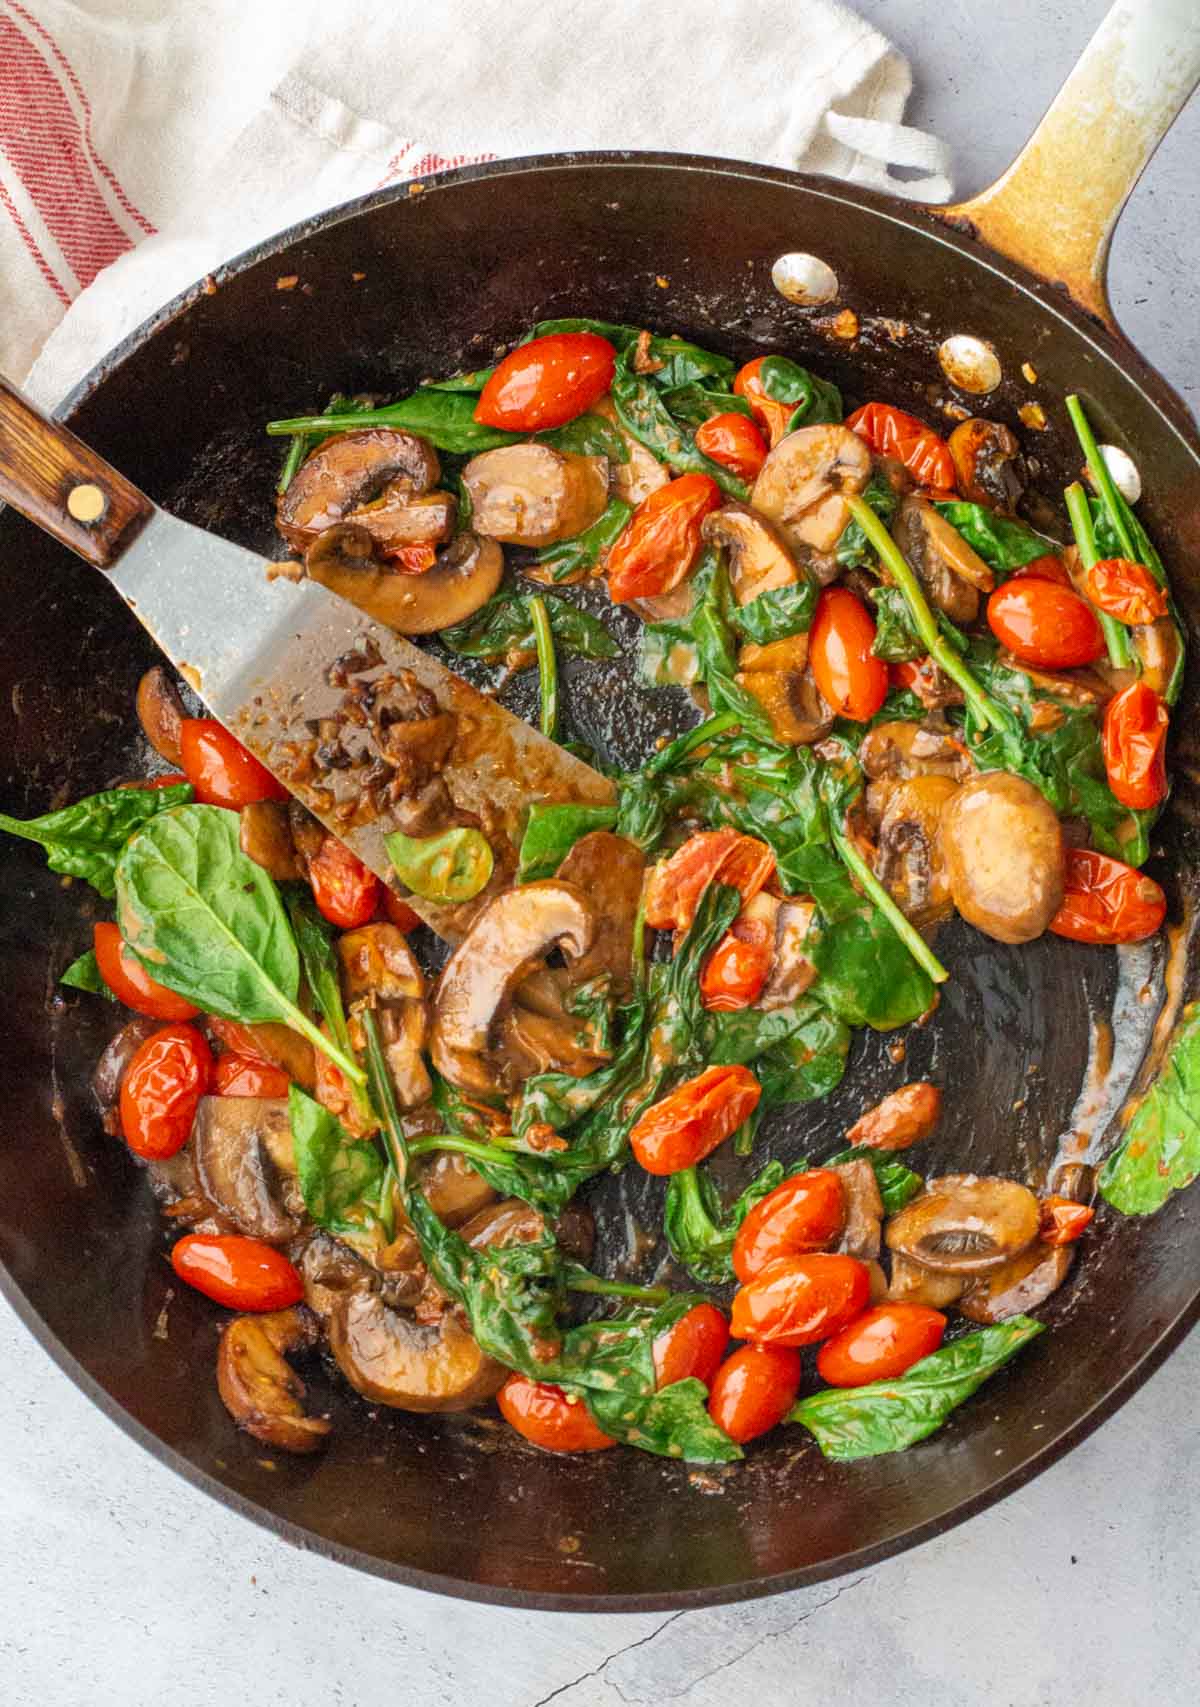 Adding spinach to a fry pan with cherry tomatoes and mushrooms to make chicken mushroom and spinach skillet dinner.